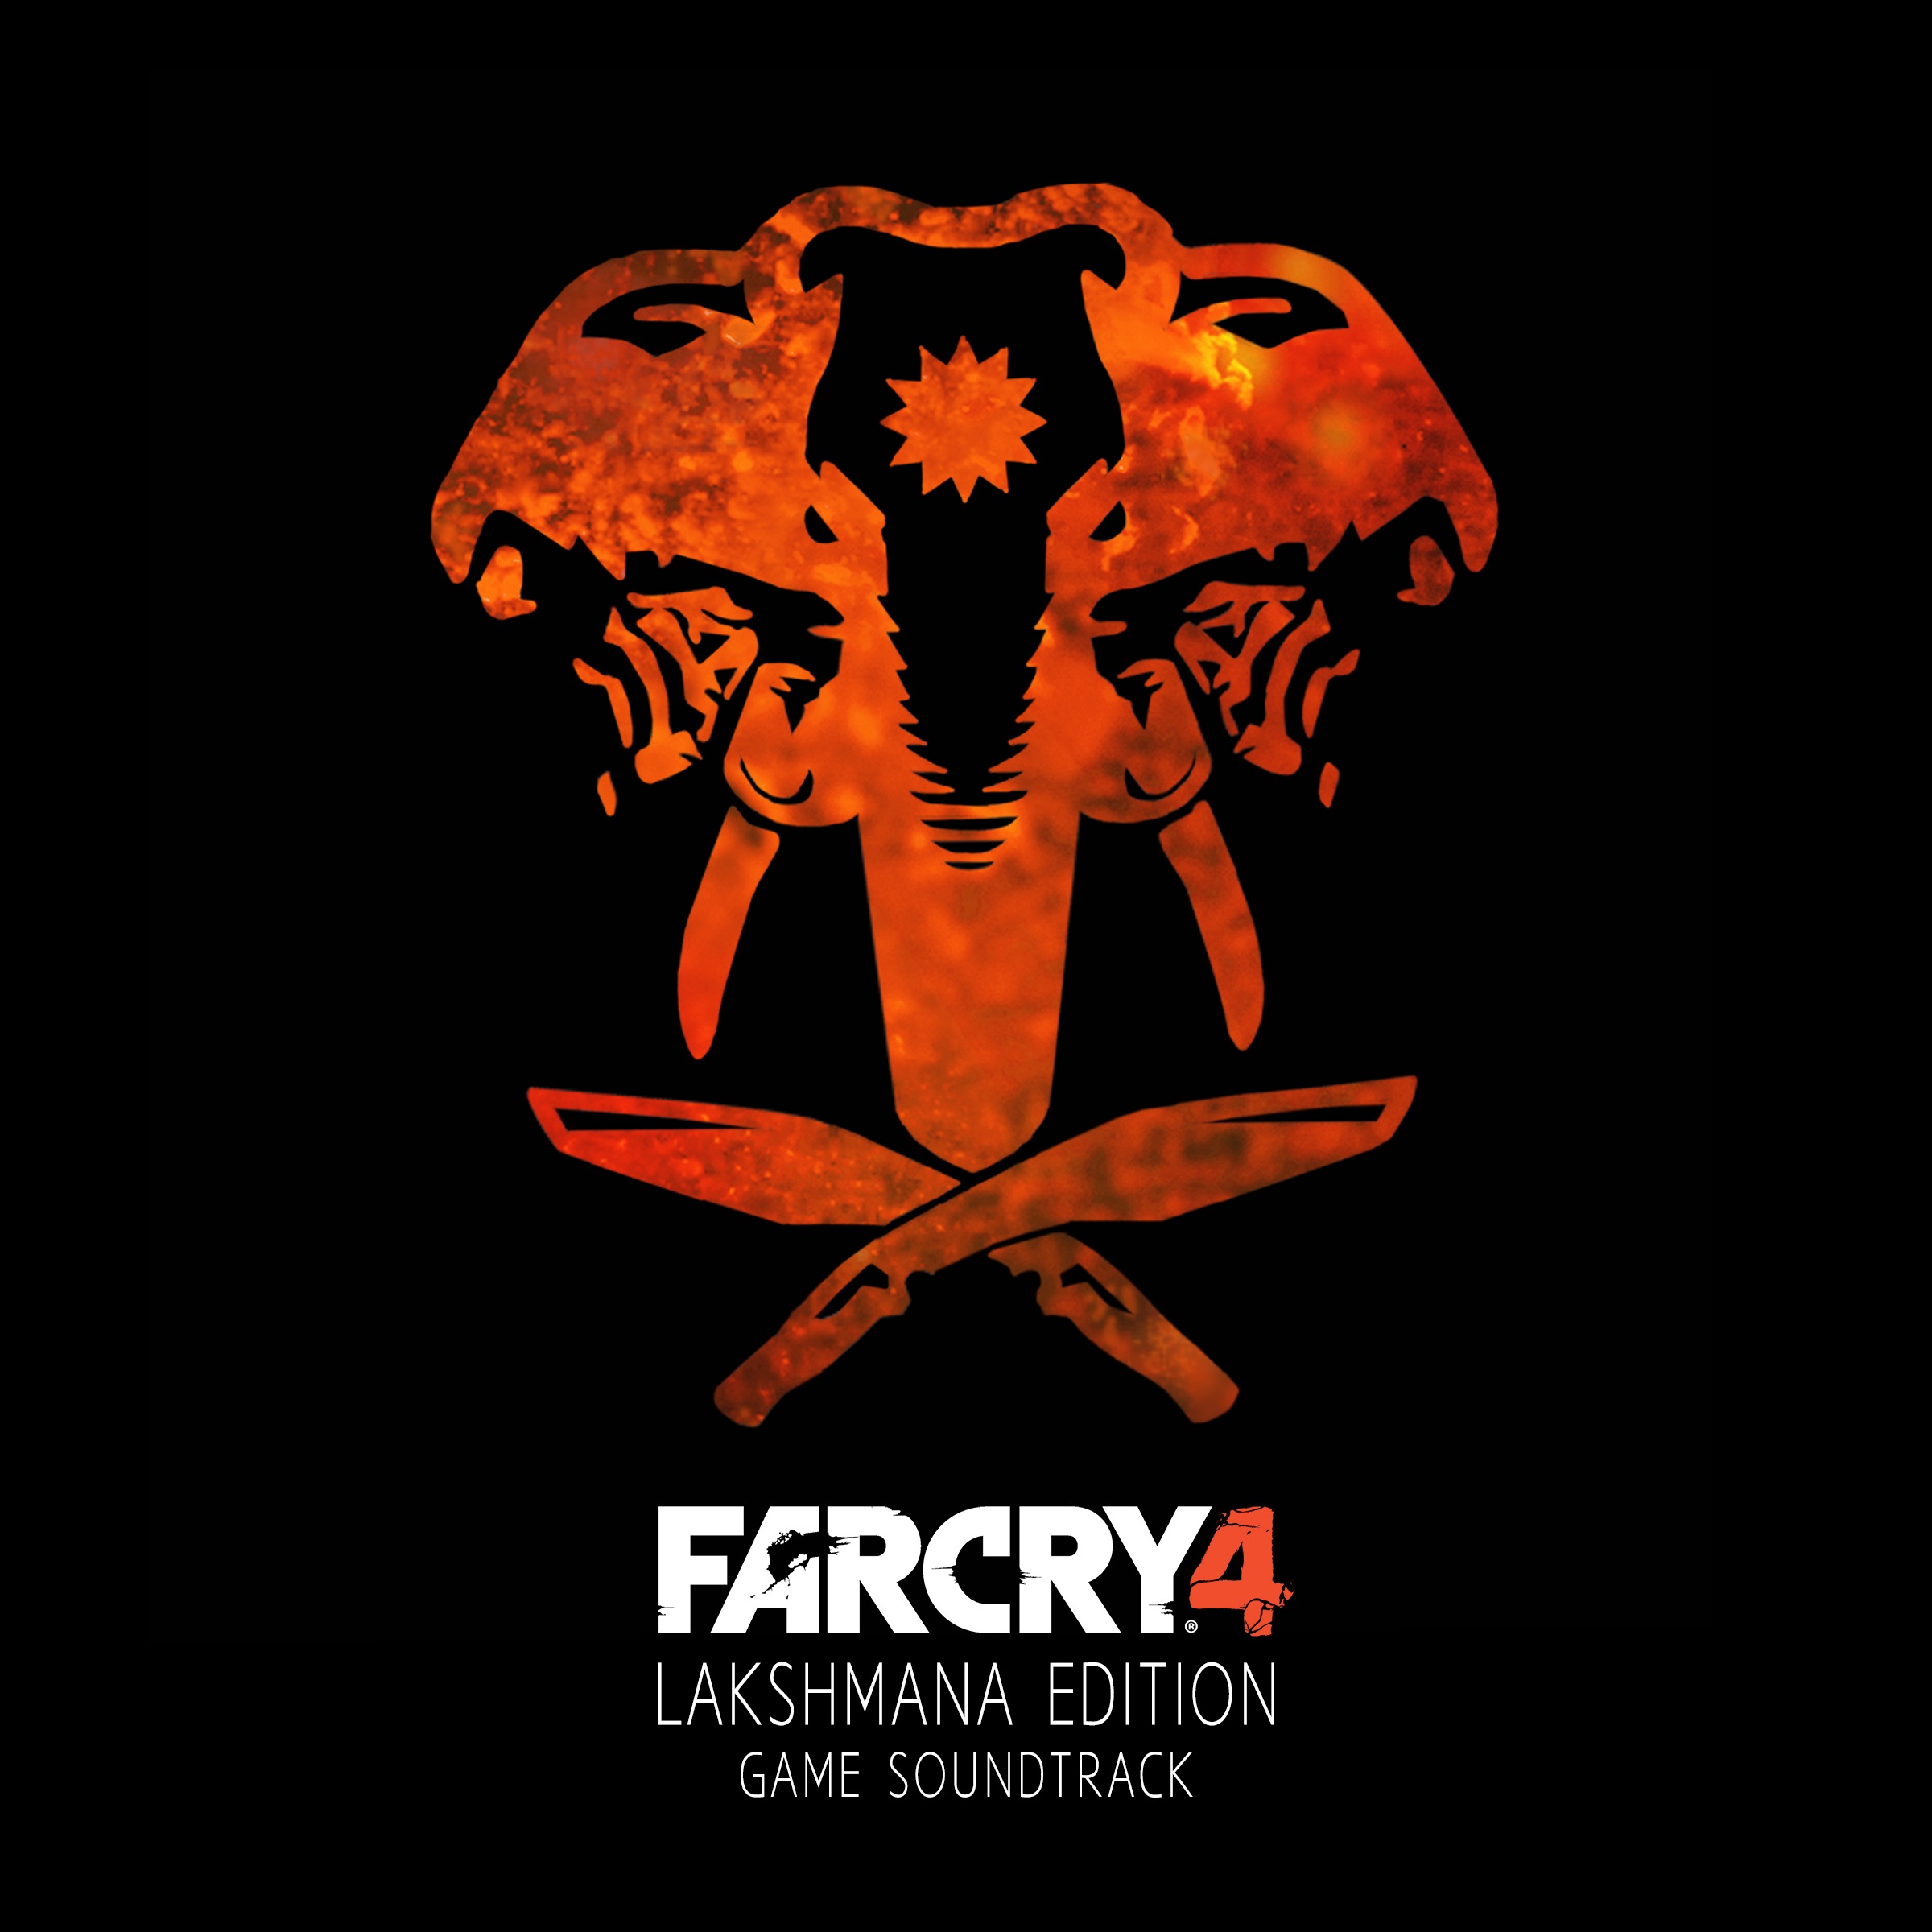 Ost far. Far Cry 5 OST обложка. Far Cry 4 complete Soundtrack. Primary OST.